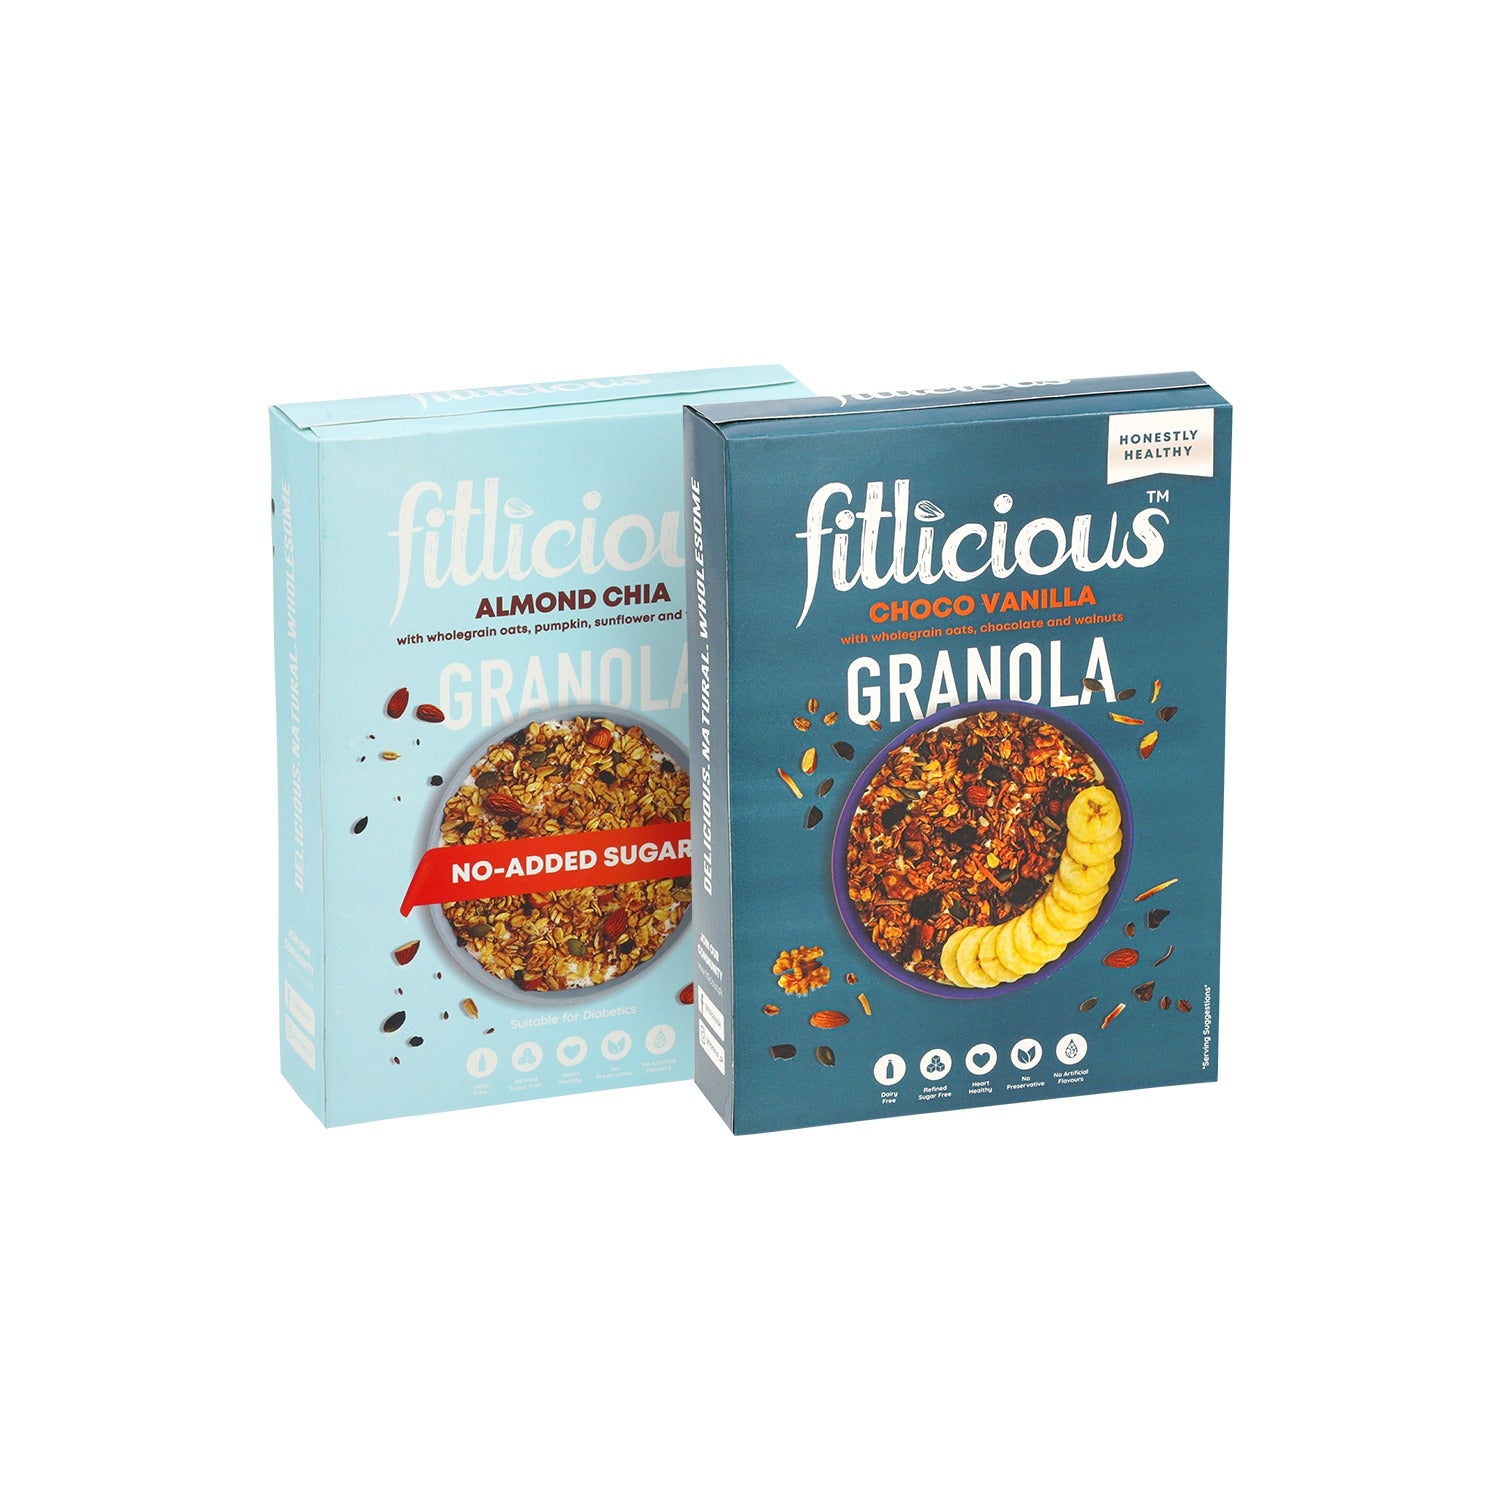 Bundle of 2 - Buy any two Granola (400gms) of your choice